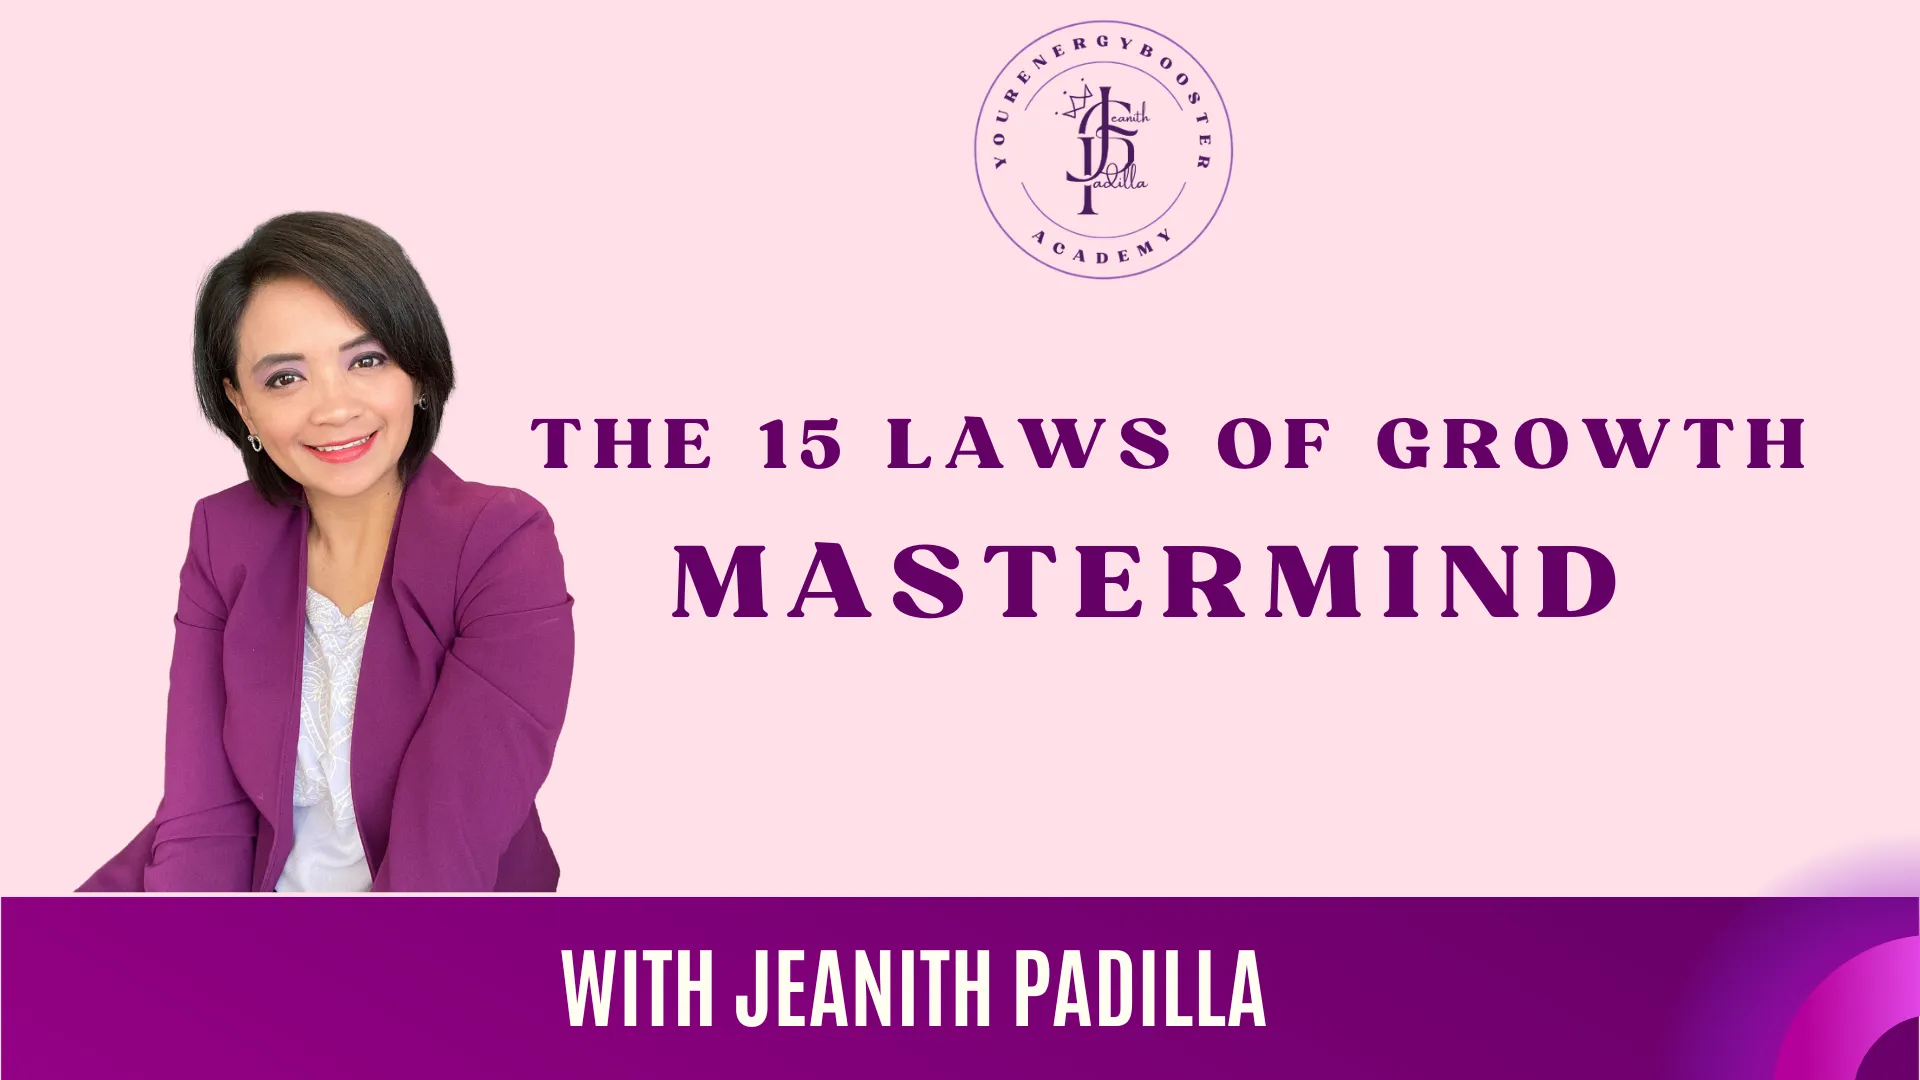 The 15 Laws of Growth Mastermind